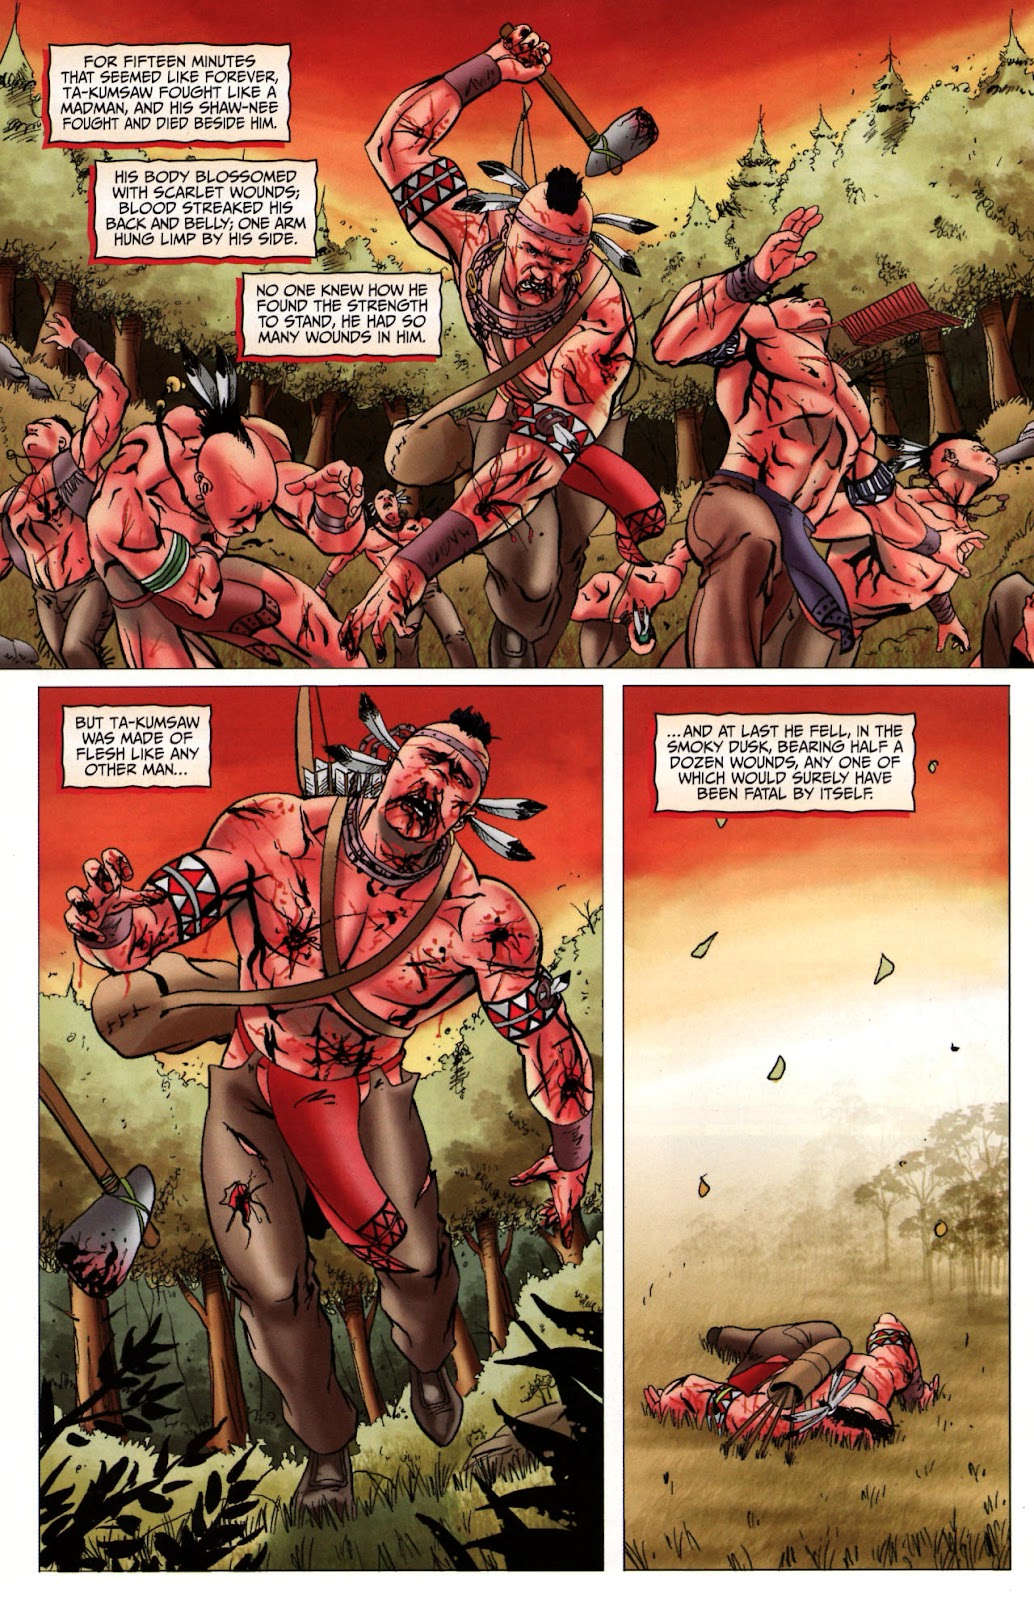 Red Prophet: The Tales of Alvin Maker issue 12 - Page 18